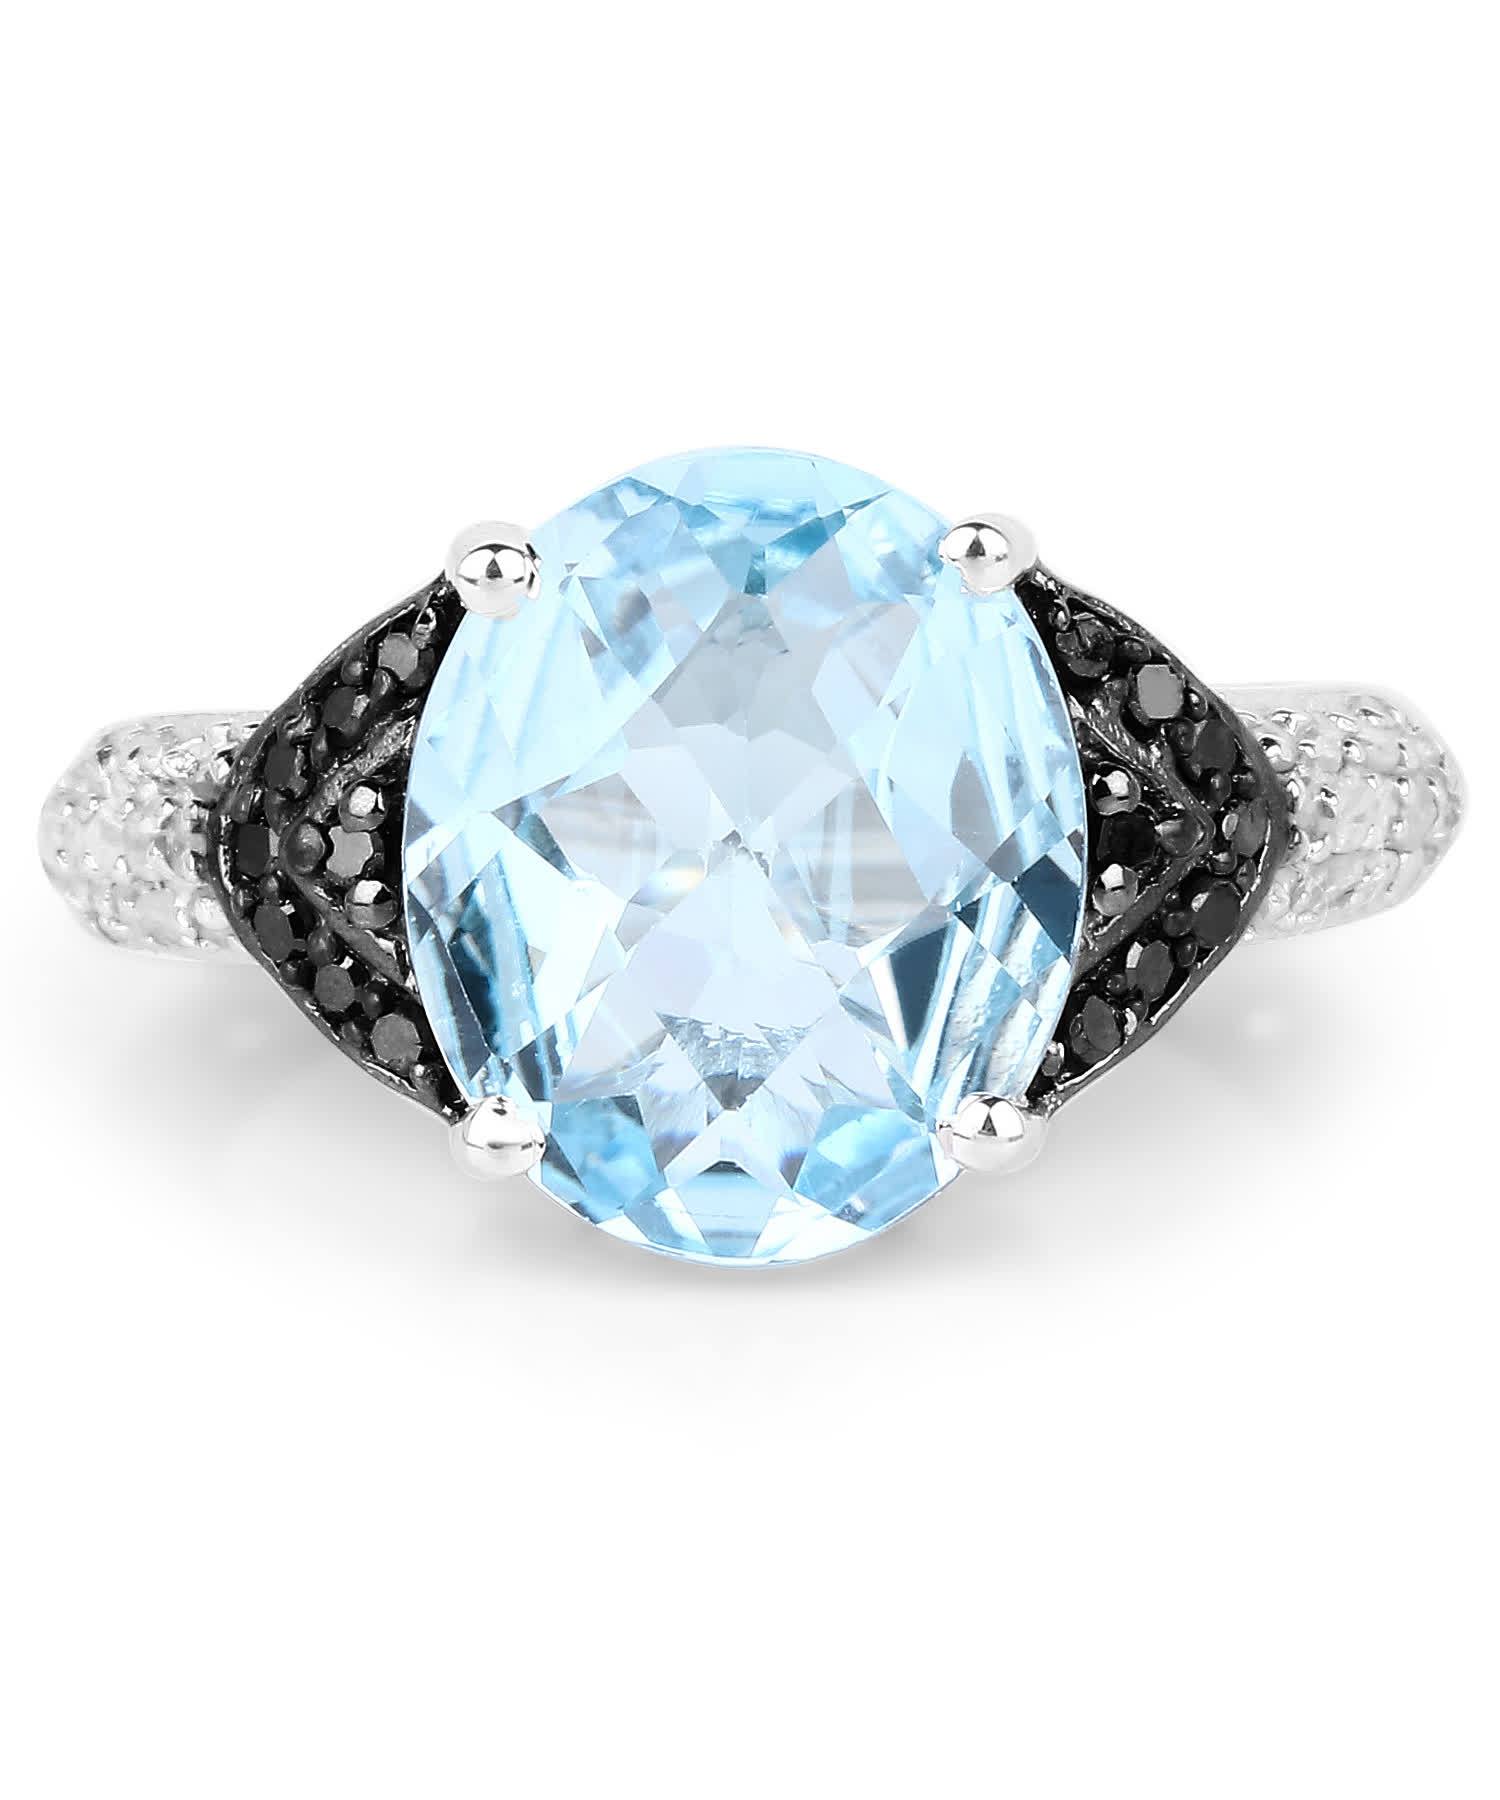 5.37ctw Natural Swiss Blue Topaz and Black Diamond Rhodium Plated 925 Sterling Silver Cocktail Ring View 3